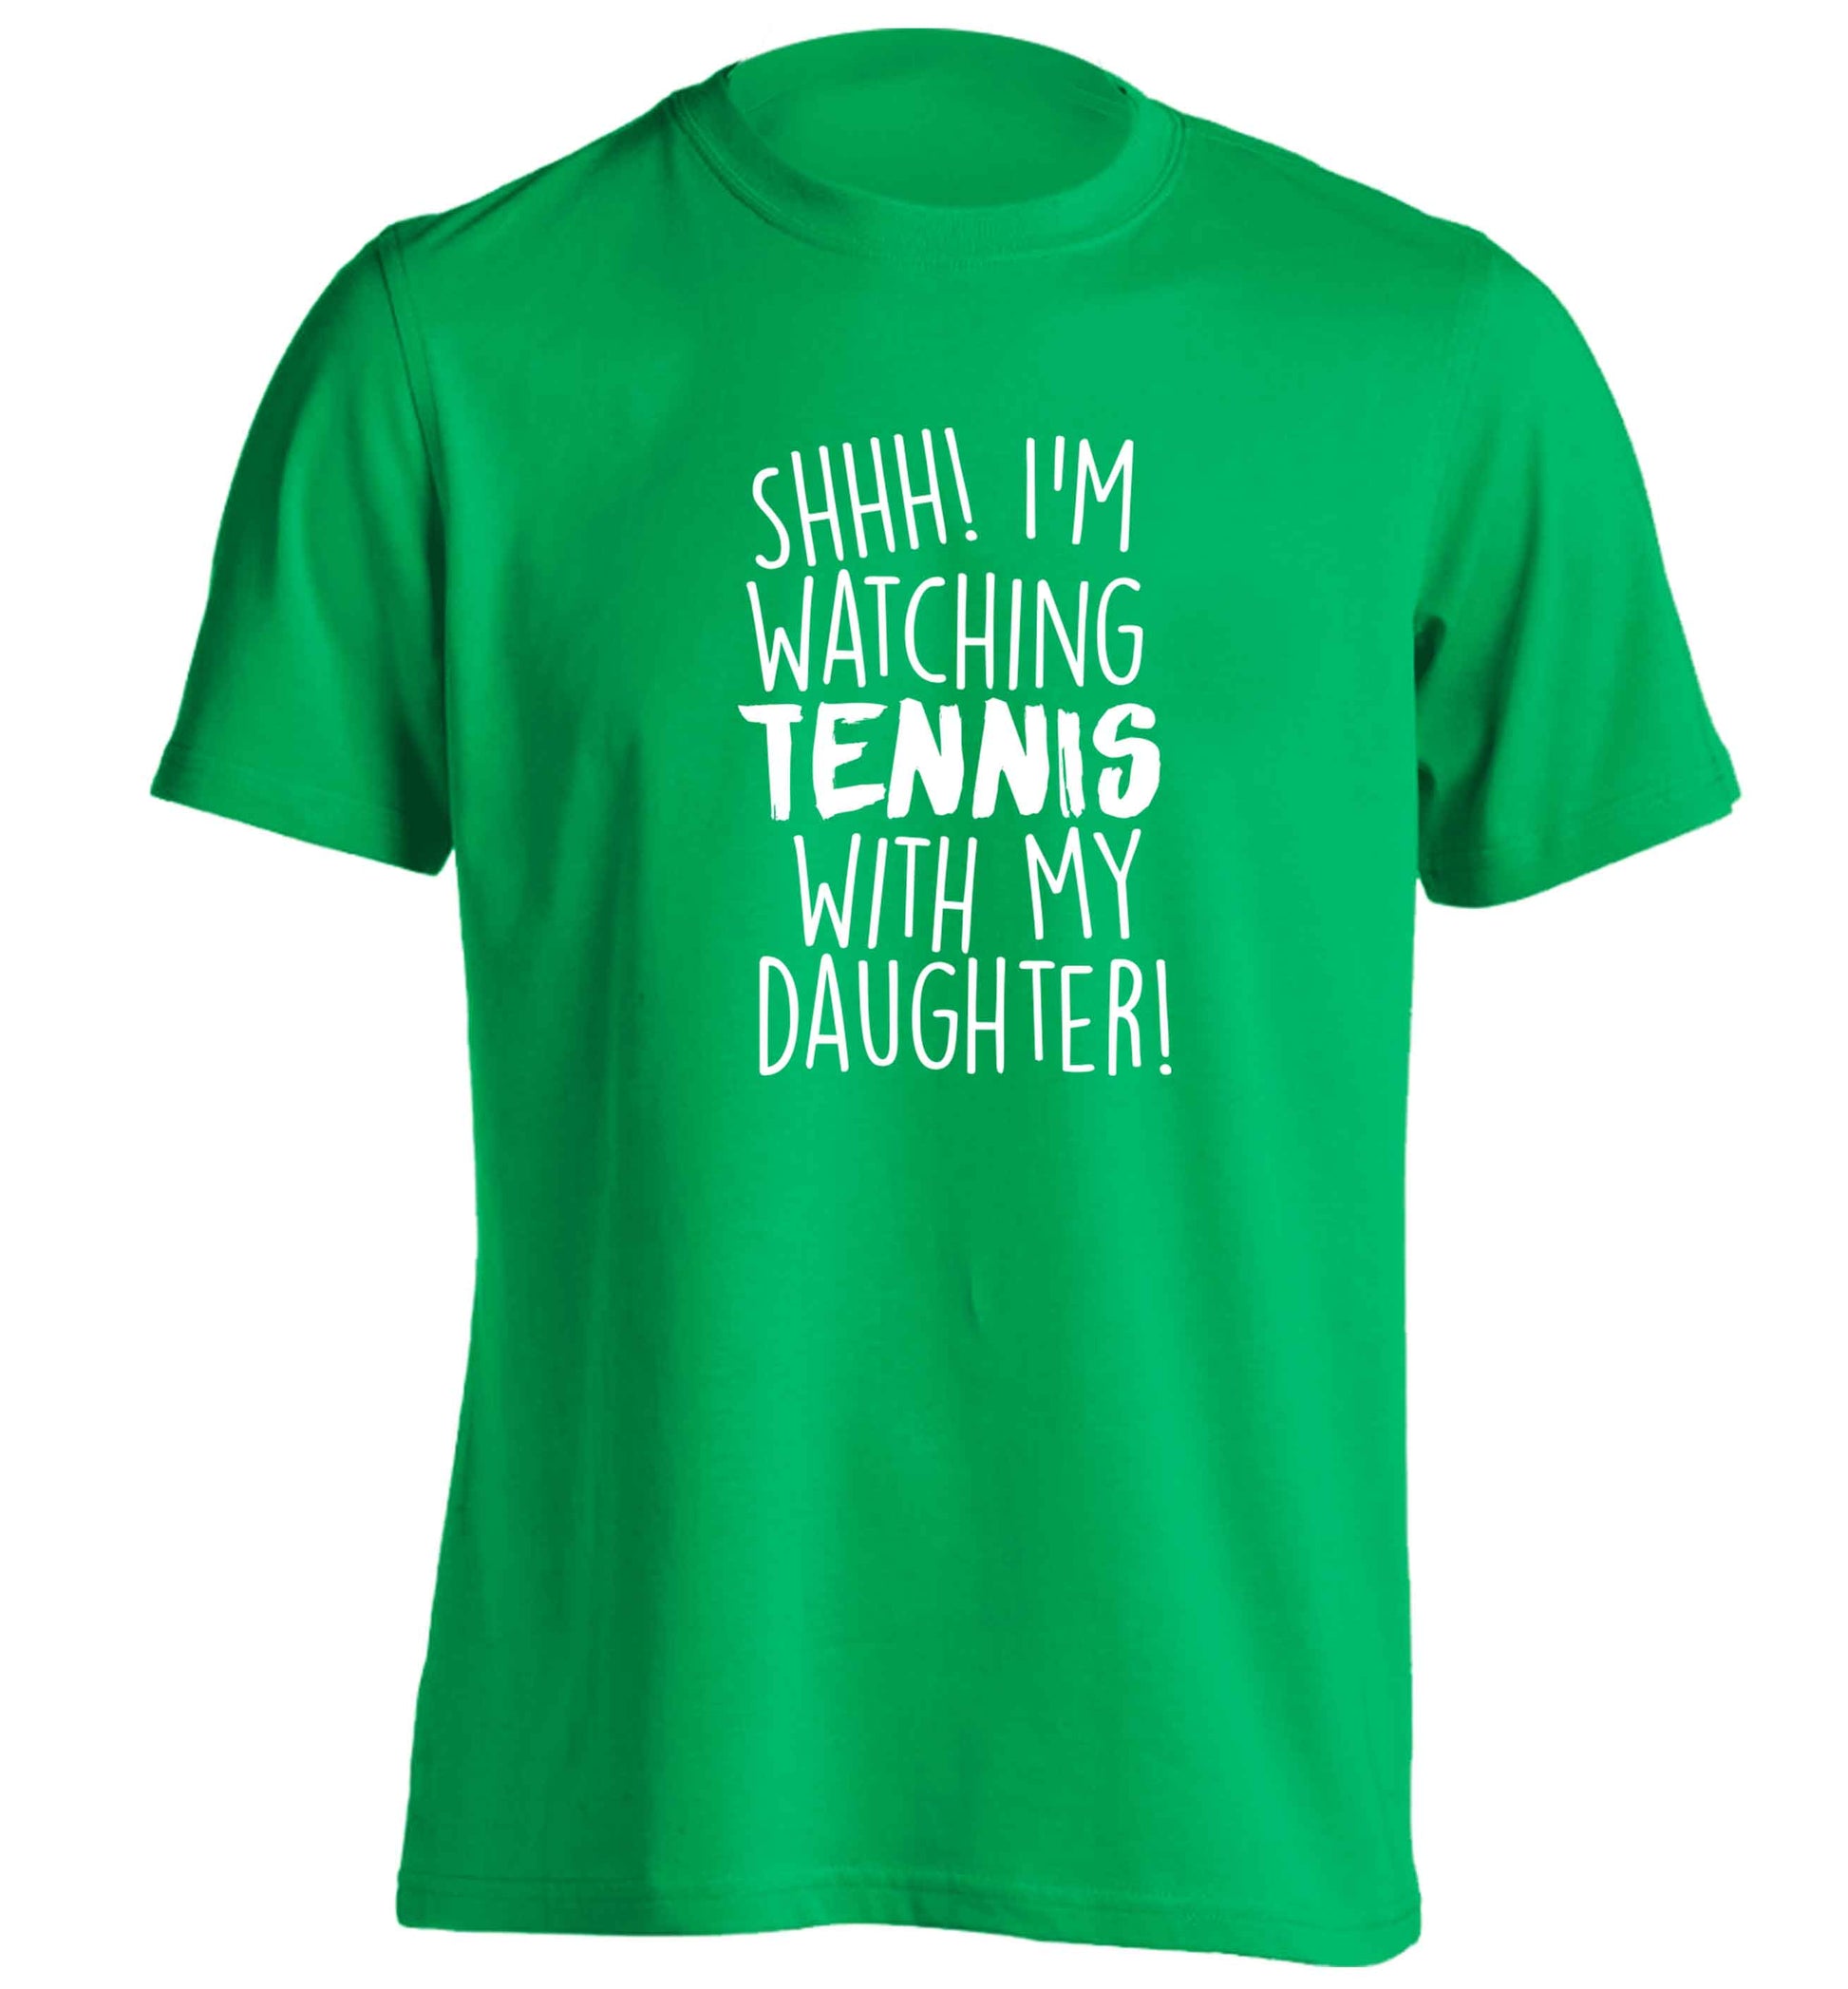 Shh! I'm watching tennis with my daughter! adults unisex green Tshirt 2XL